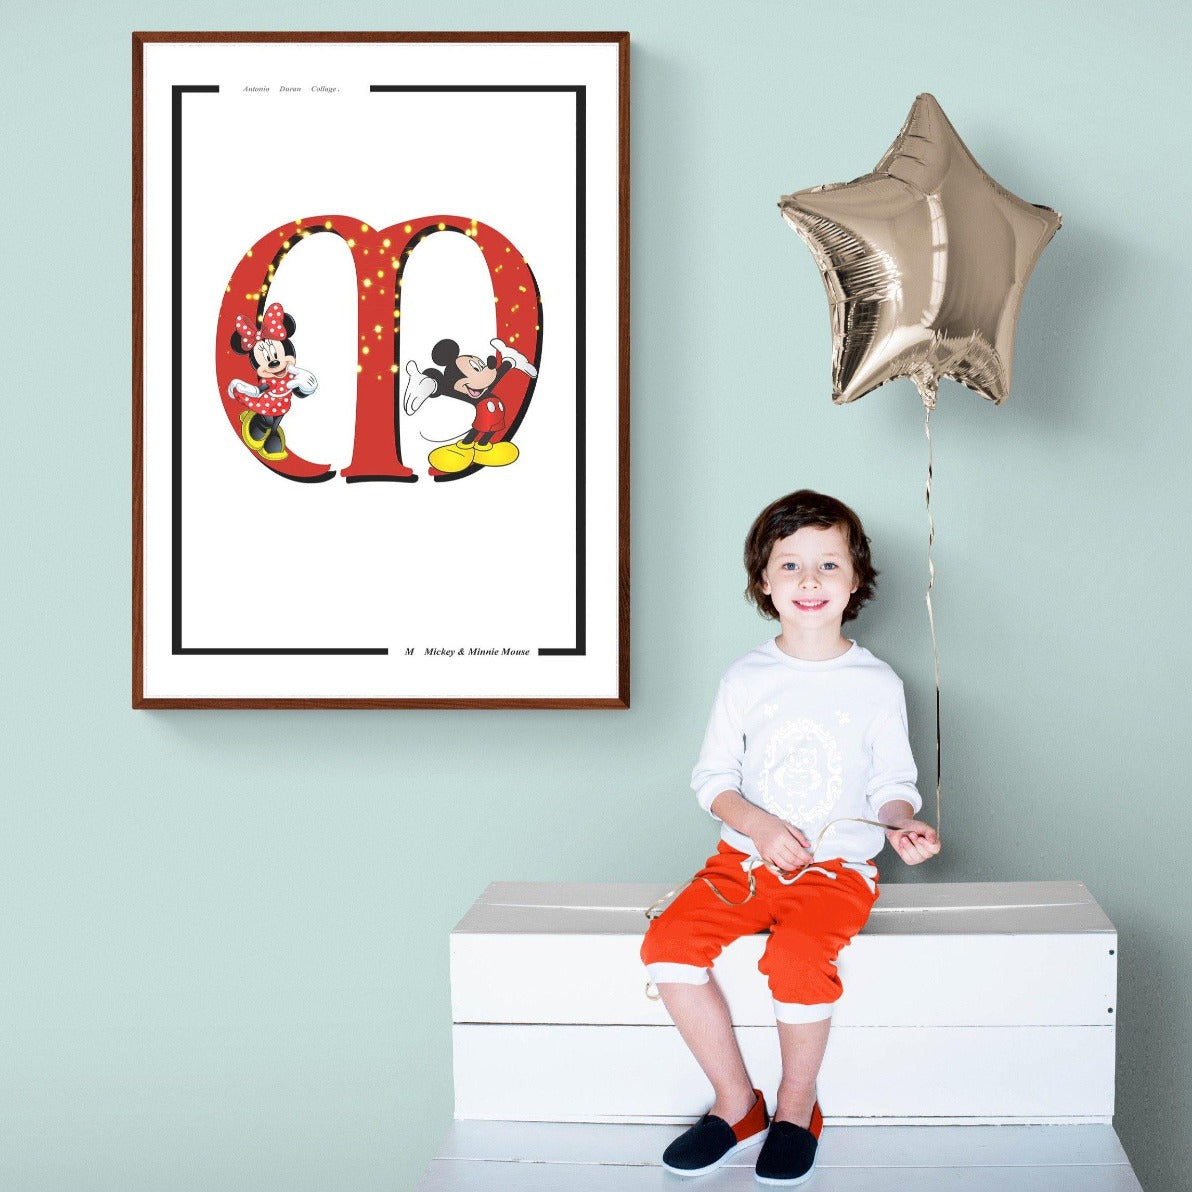 Discover timeless Disney memories with these beautiful fine art prints. Perfect for Disney fans of all ages, this poster collection features iconic characters from Disney animated movies, wall prints from Disneyland, and classic princess posters in brilliant colors. Hang your favorites and make any room come to life.